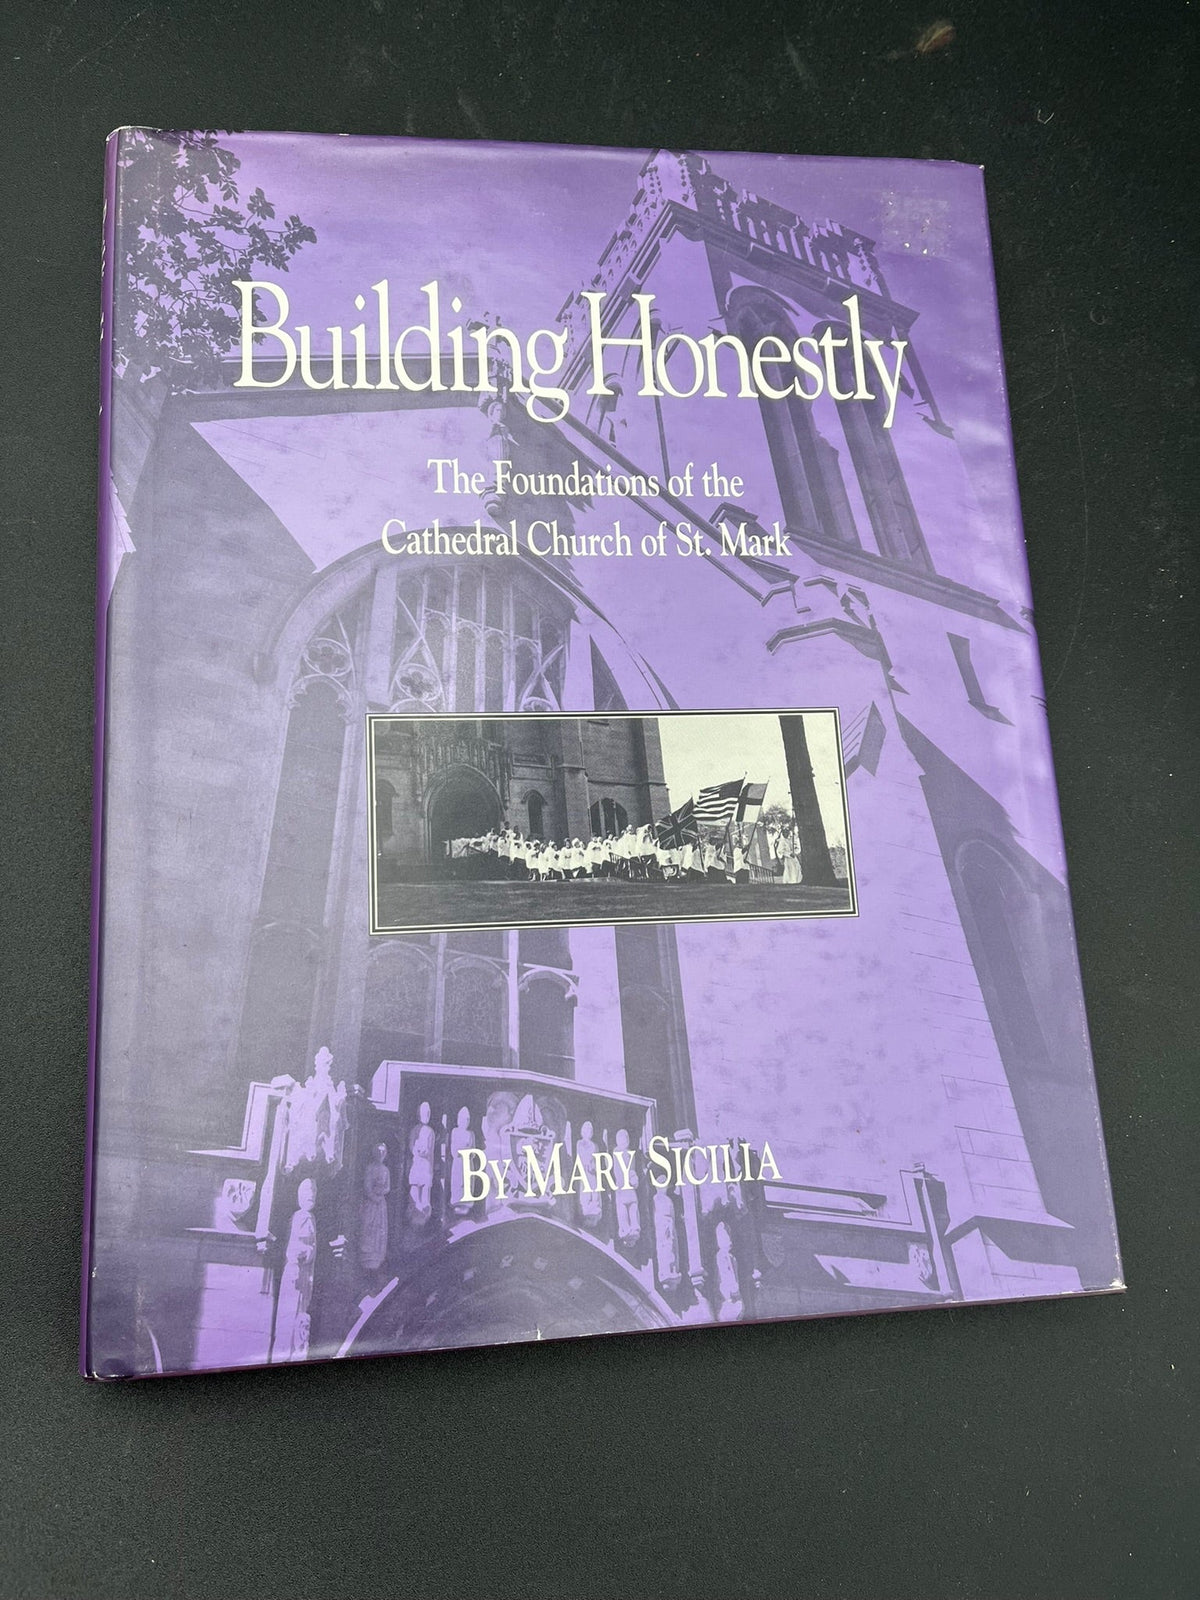 Building Honestly - The Foundatios of the Cathedral Church of St. Mark